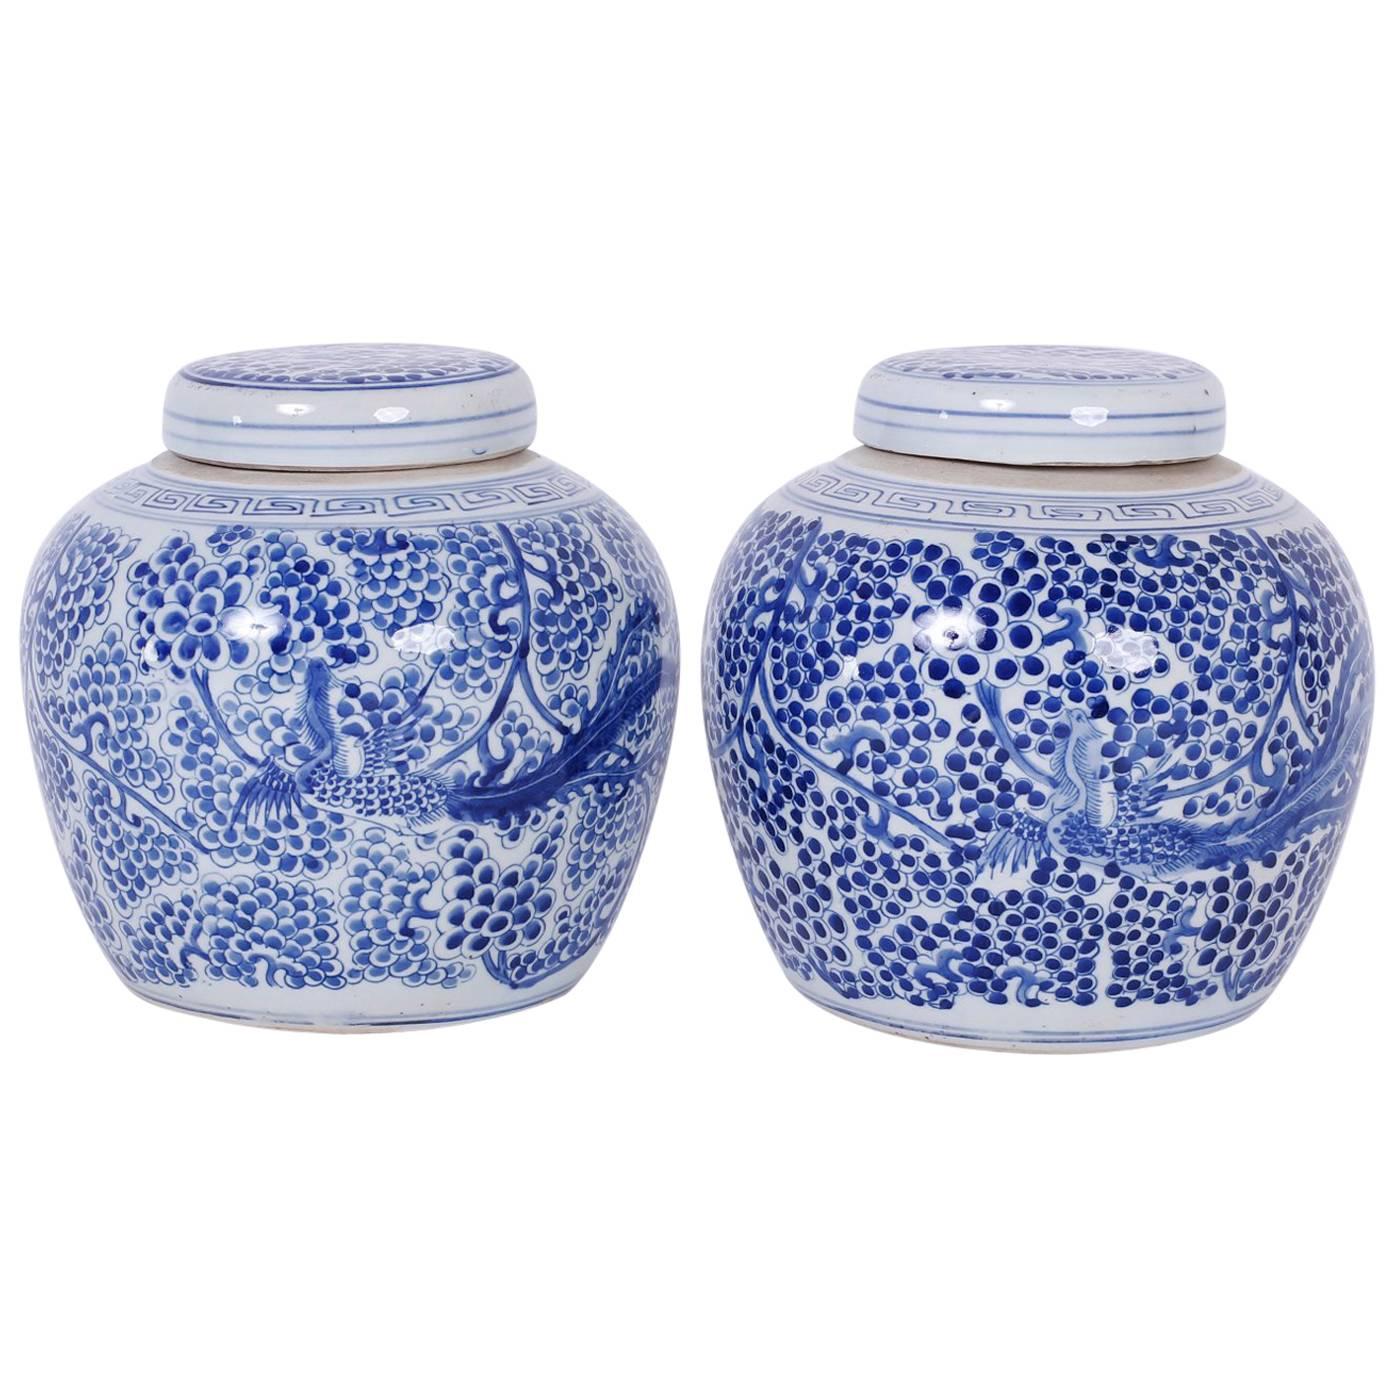 Pair of Chinese Export Style Blue and White Porcelain Ginger Jars